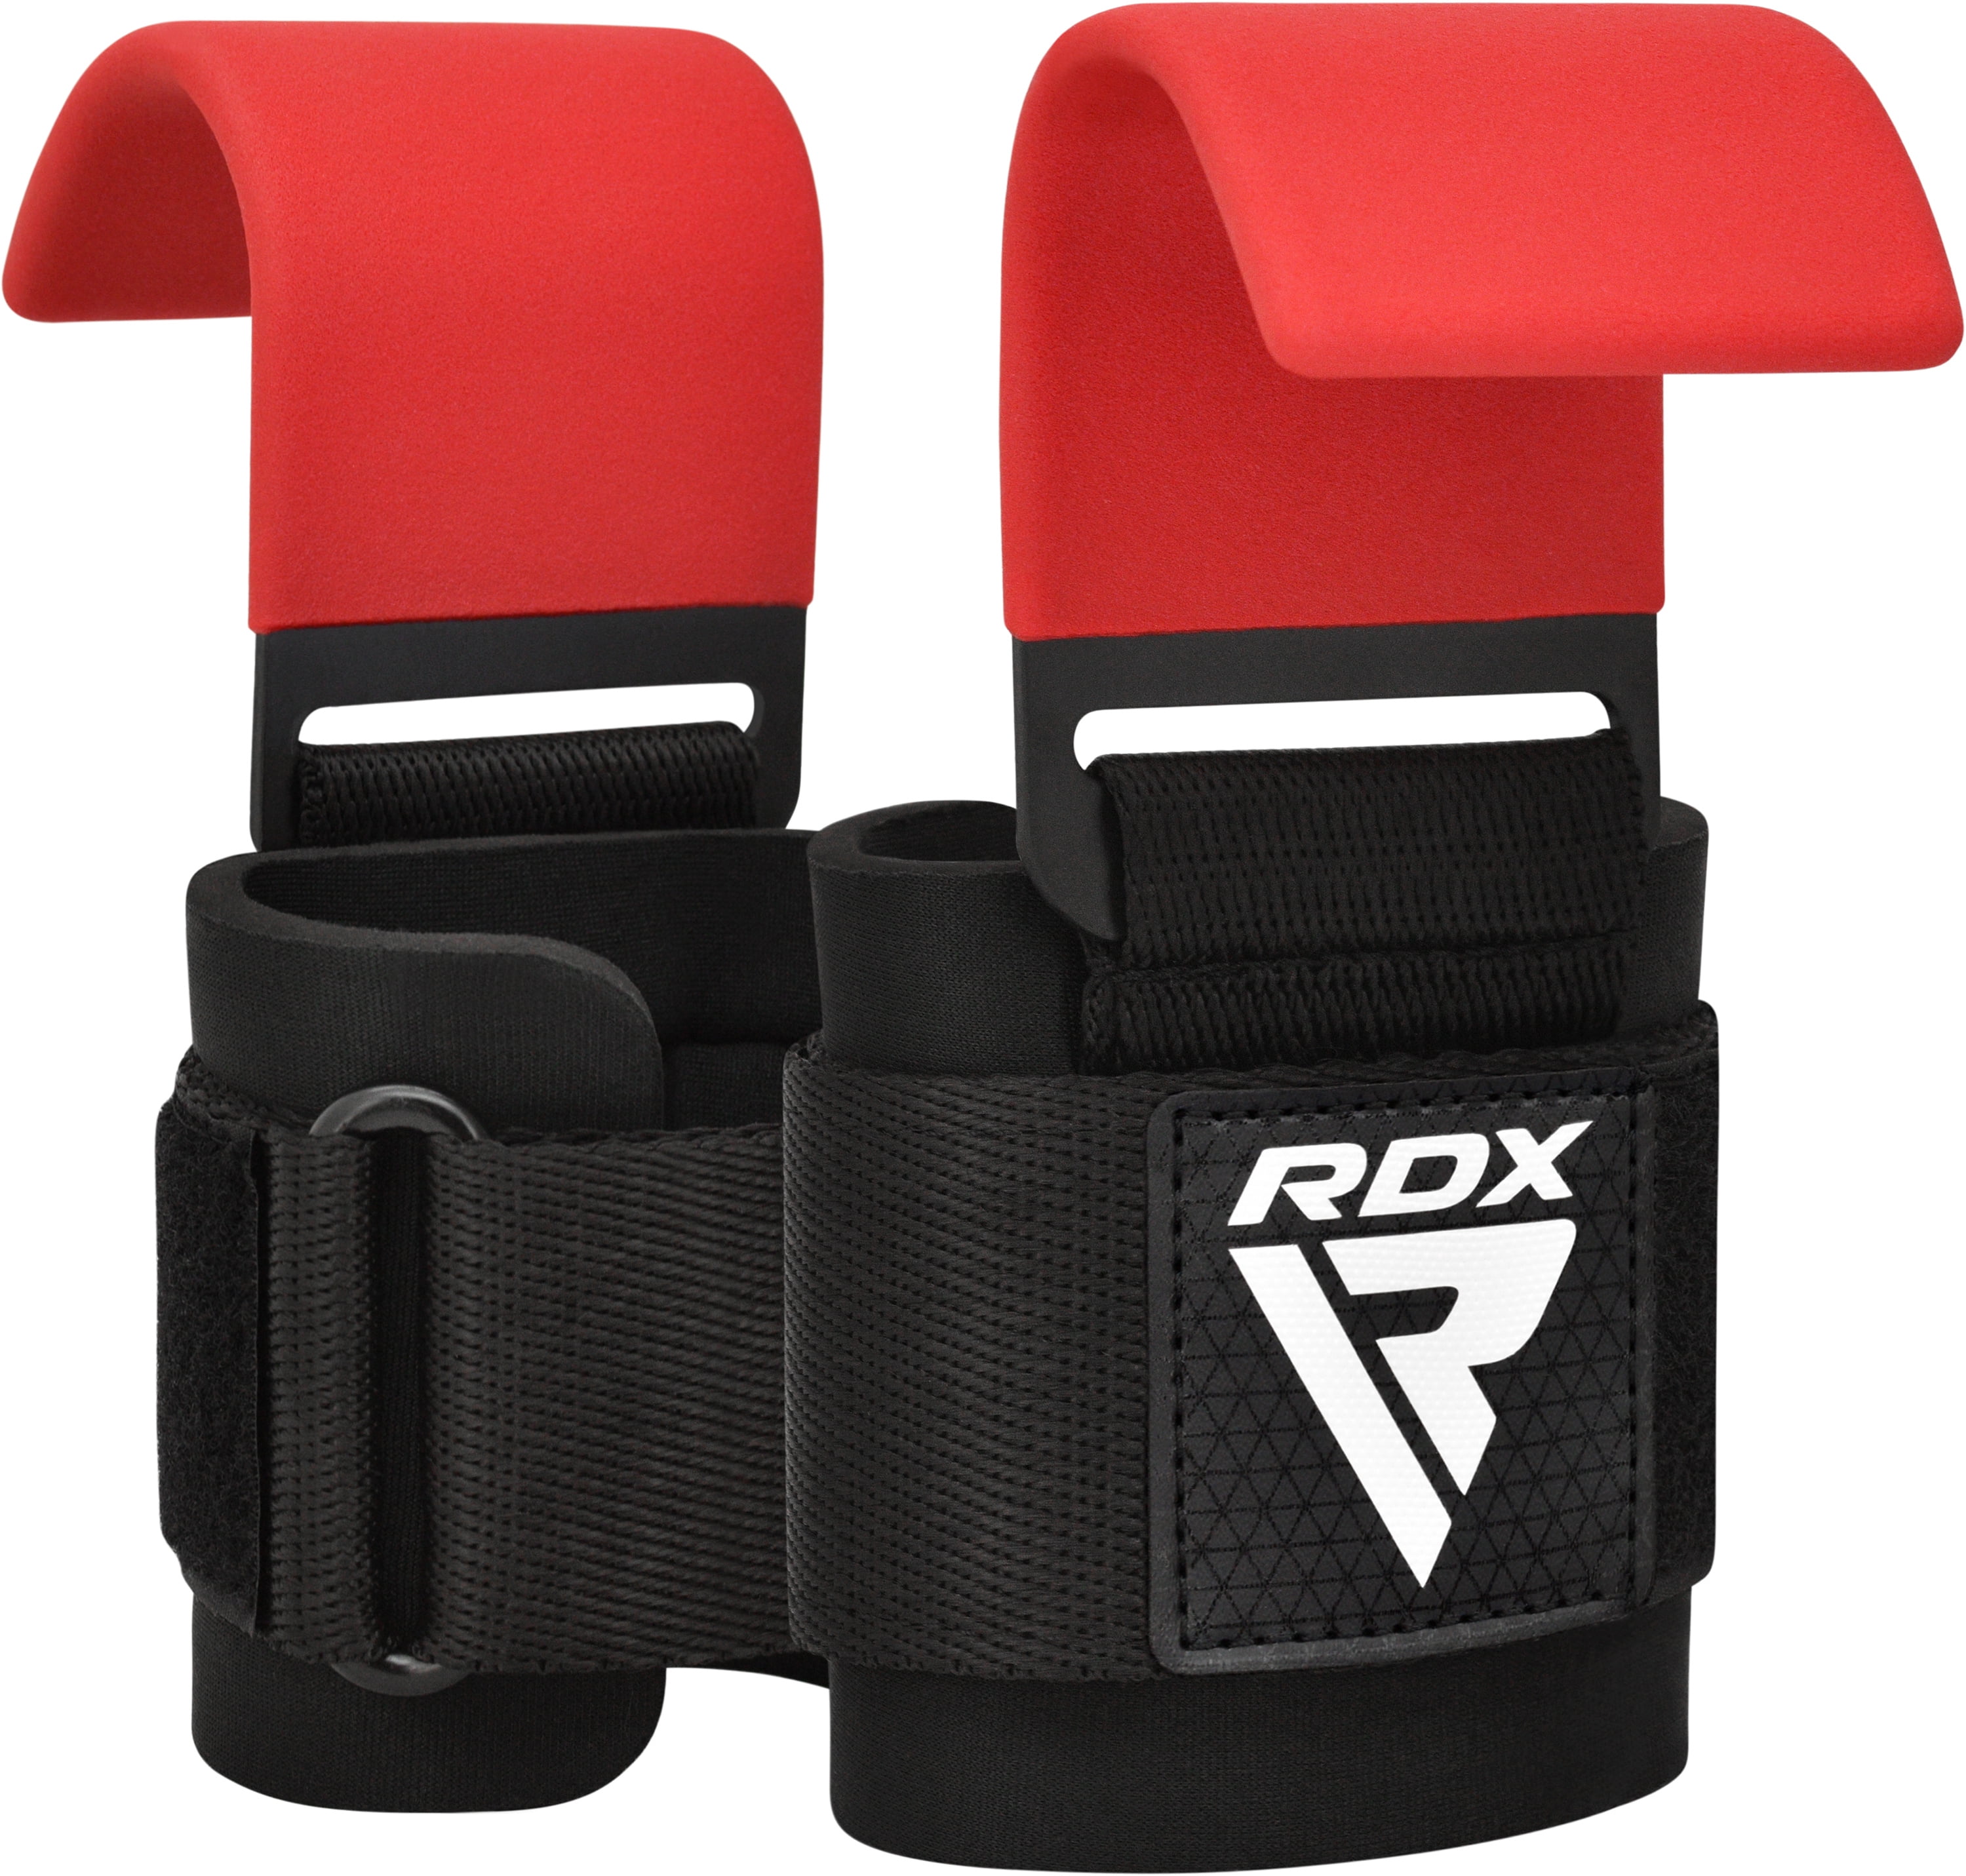 RDX Weight Lifting Hooks Straps Pair, Non-Slip Rubber Coated Grip